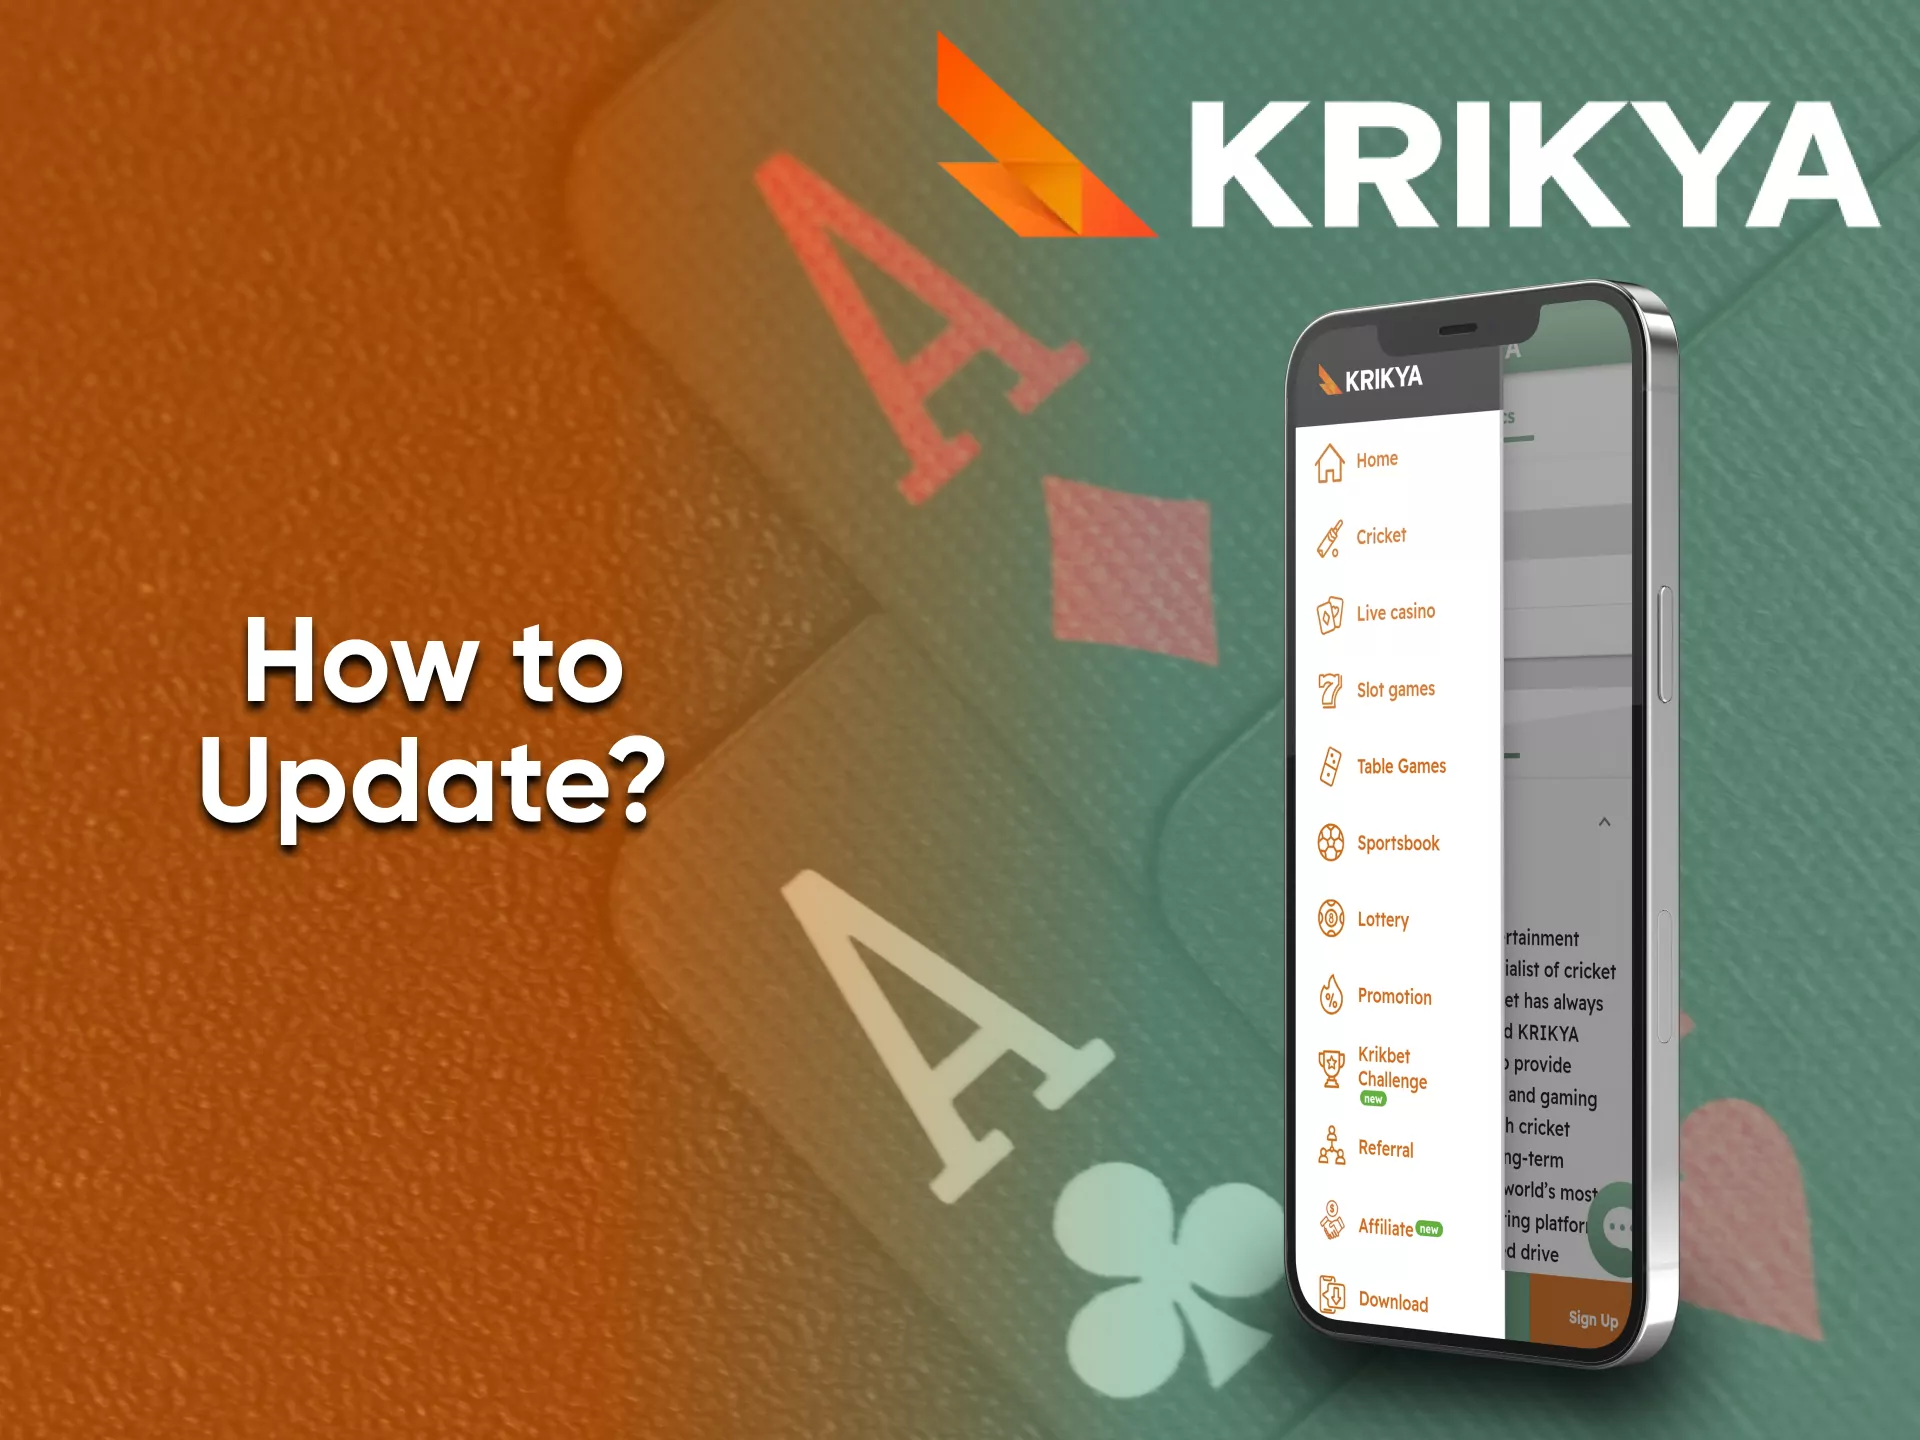 Go to the appropriate section to update the Krikya app.